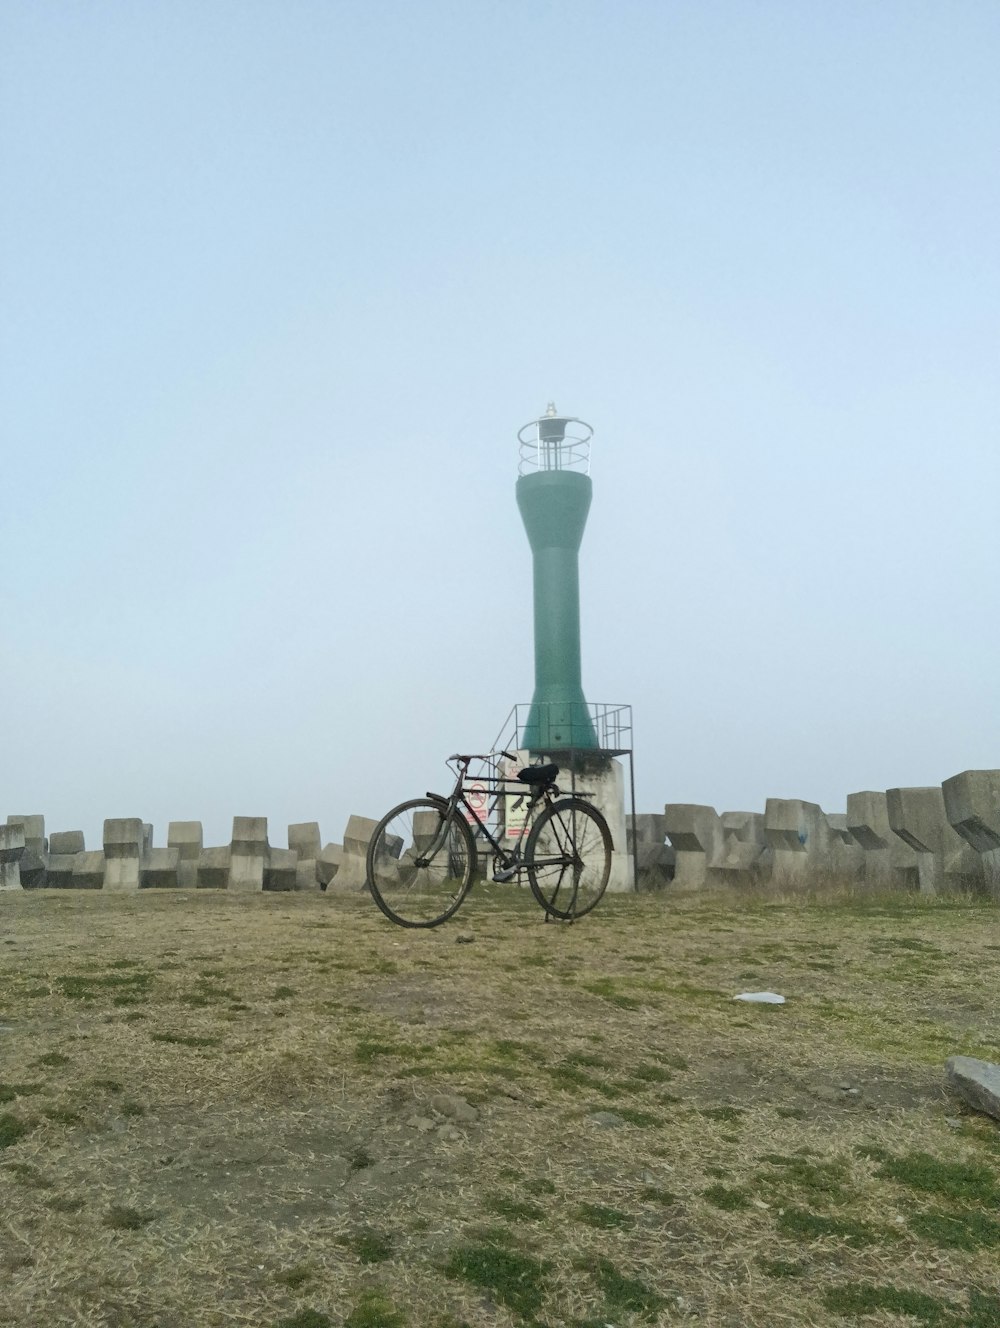 a bicycle parked in front of a green tower